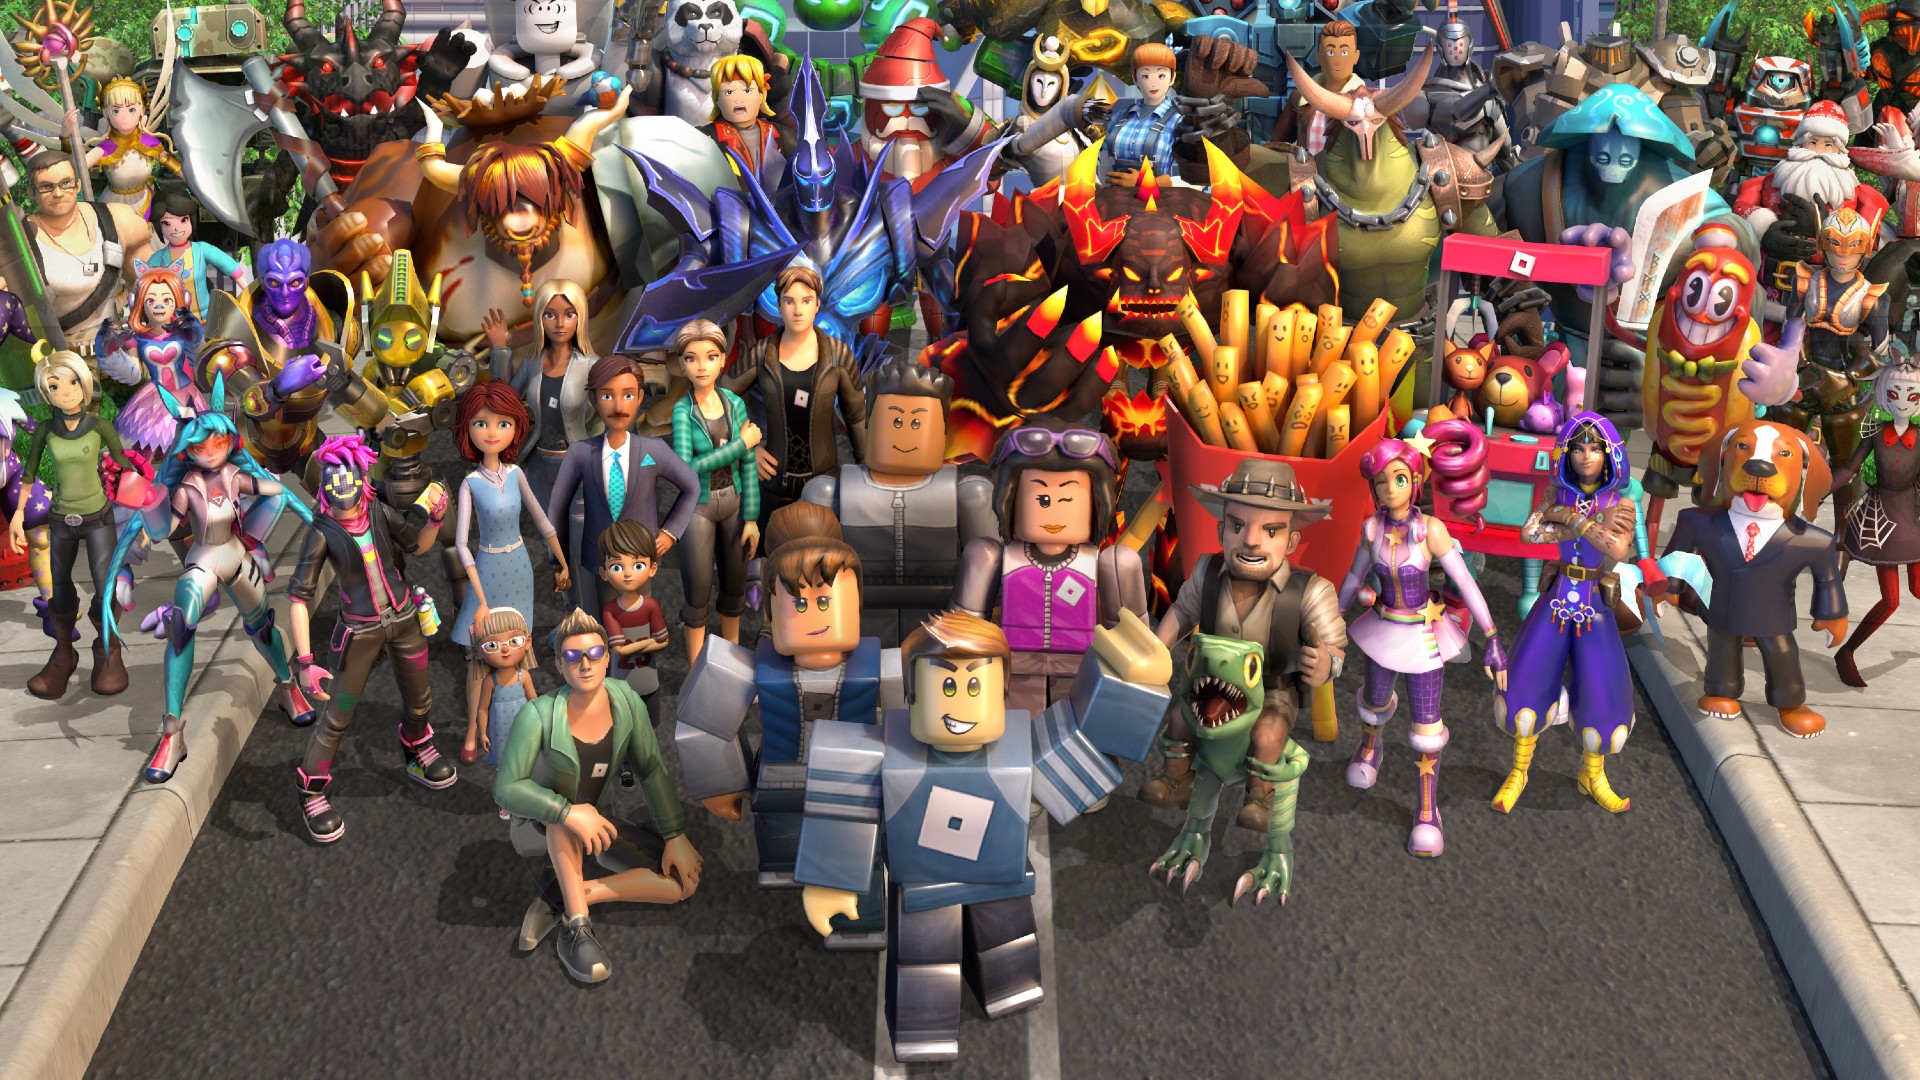 Roblox promo codes list November 2021 – how to redeem